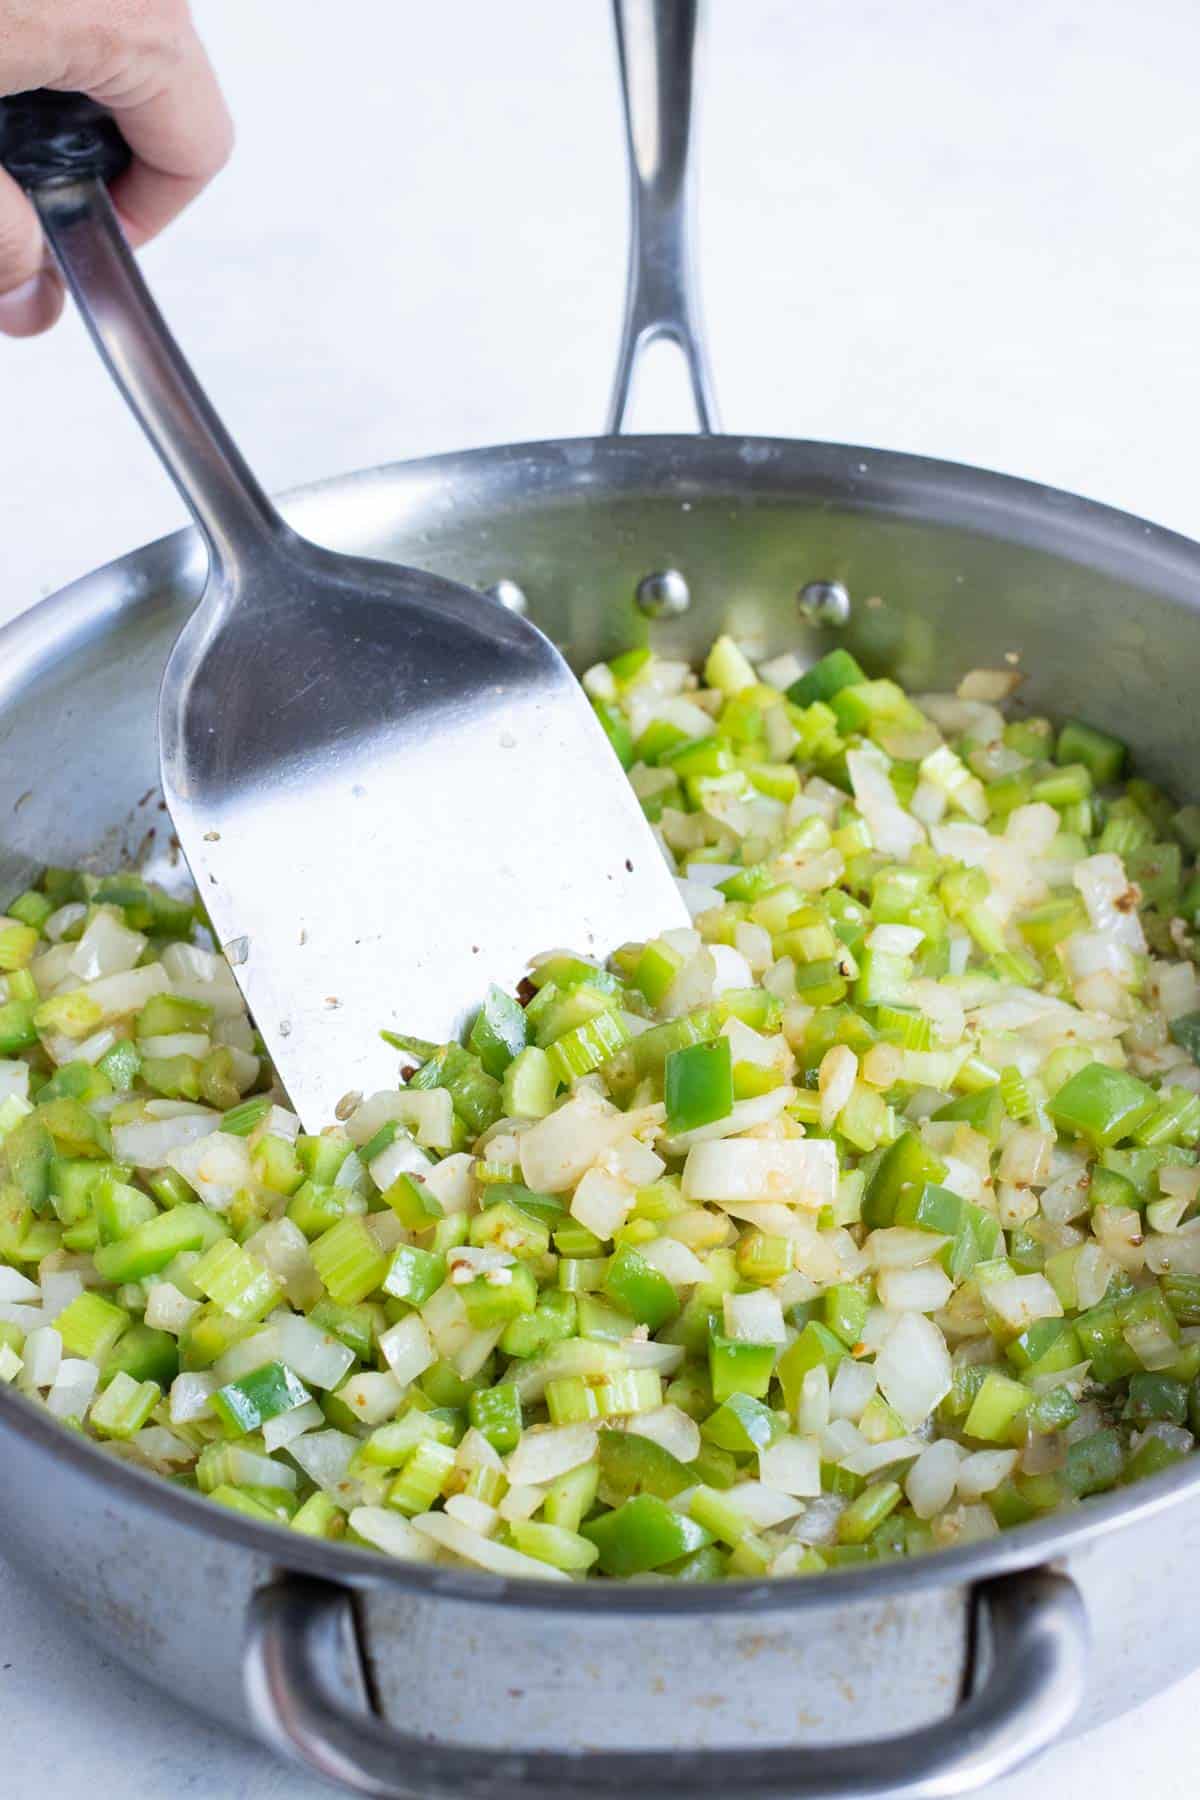 Onions, celery, and bell peppers are sauteed in a pan.